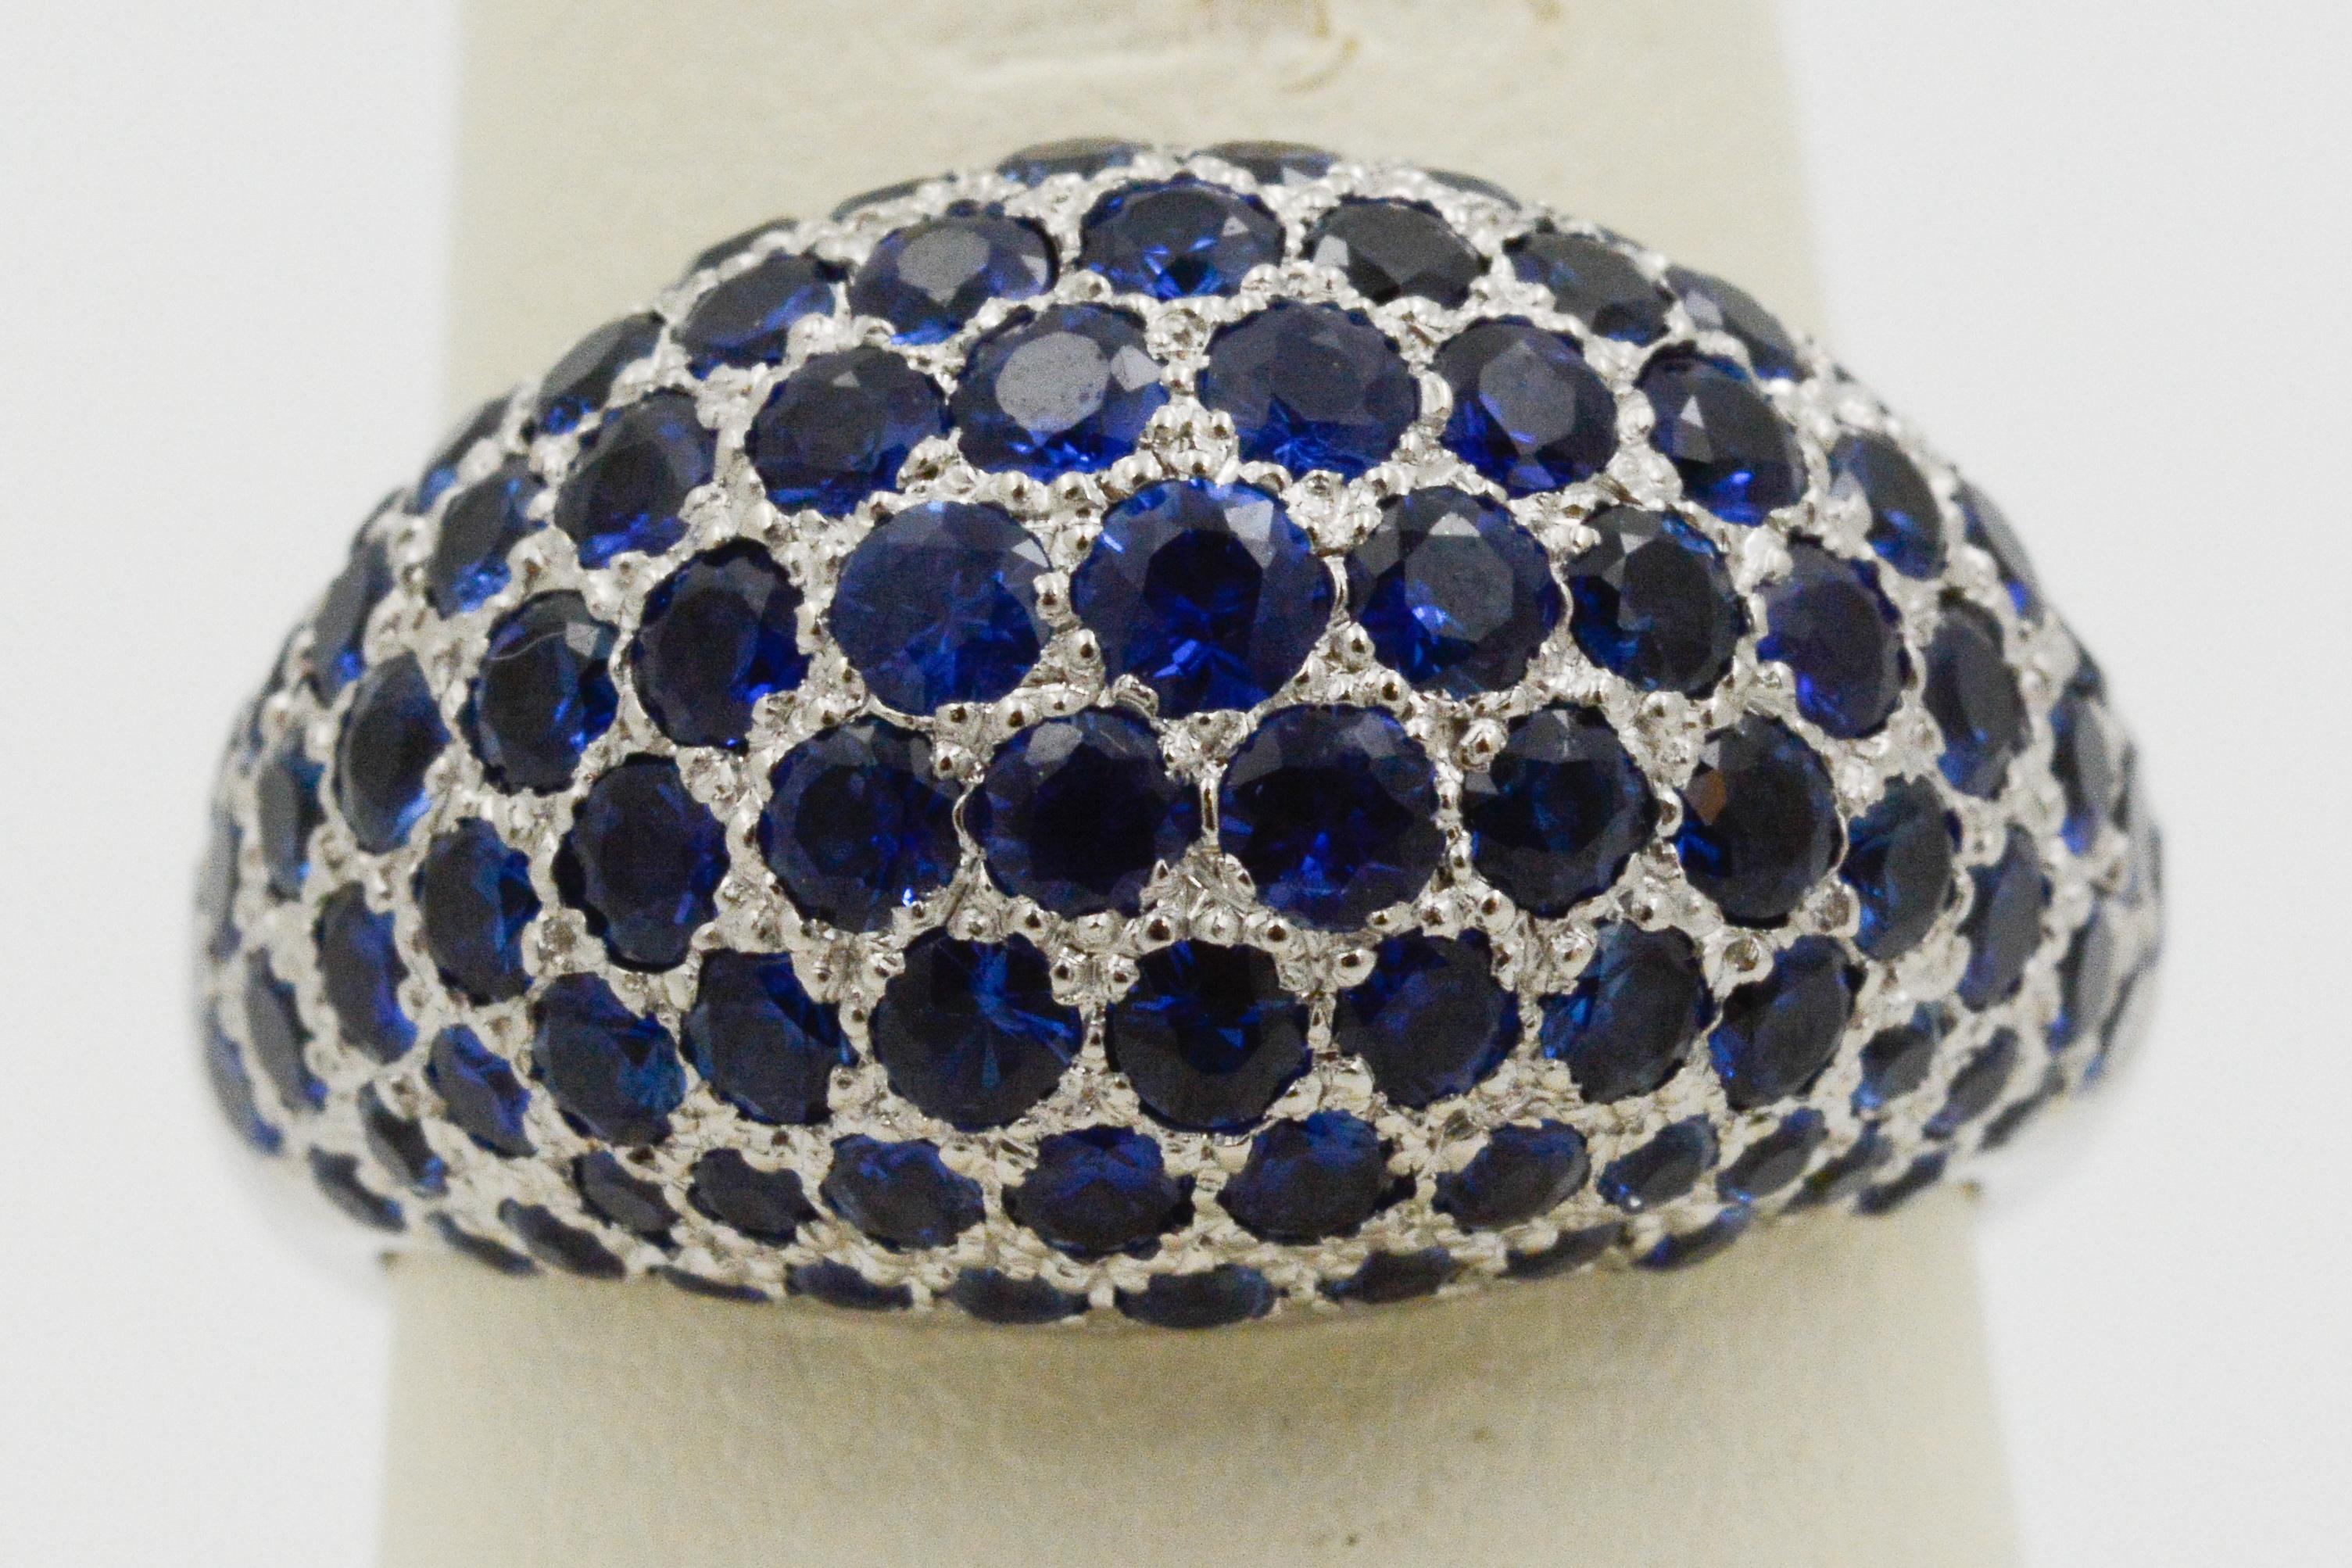 Embellished with 107 round blue sapphires with a combined total approximate weight of 5.00 carats, this 14 karat white gold dome ring is a show stopper. The back of the ring has a graphic open design that lets the light of the blue sapphires peek